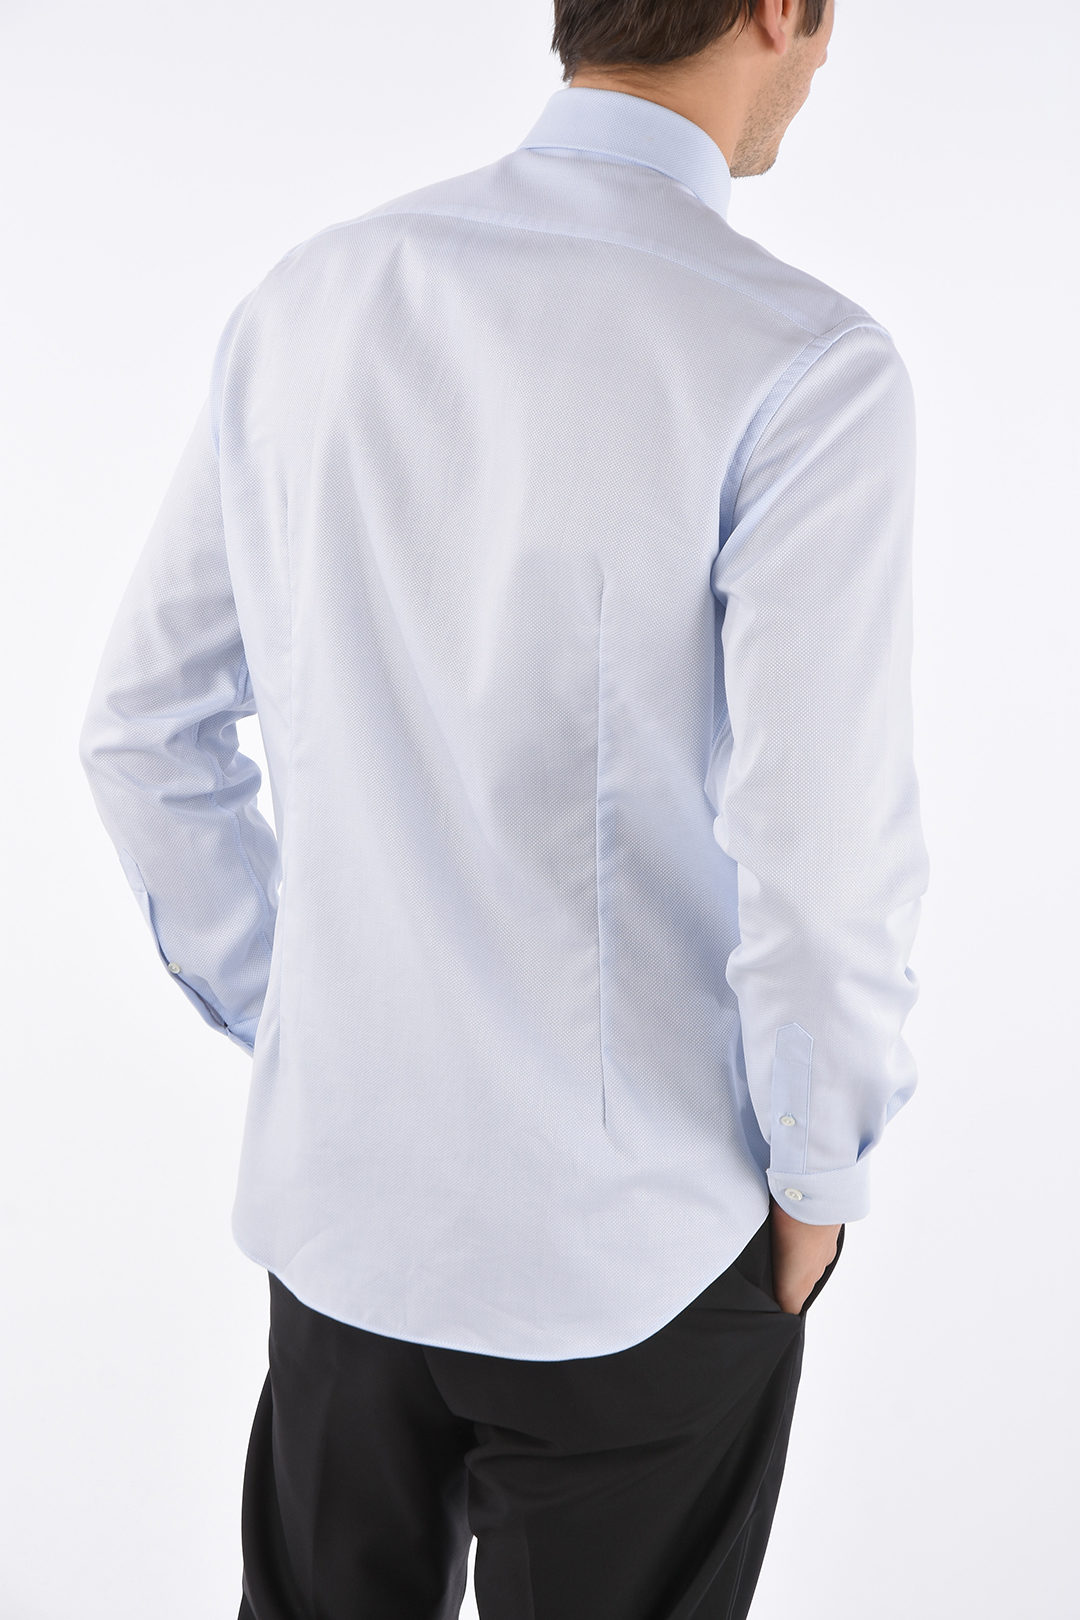 collared shirt from the side